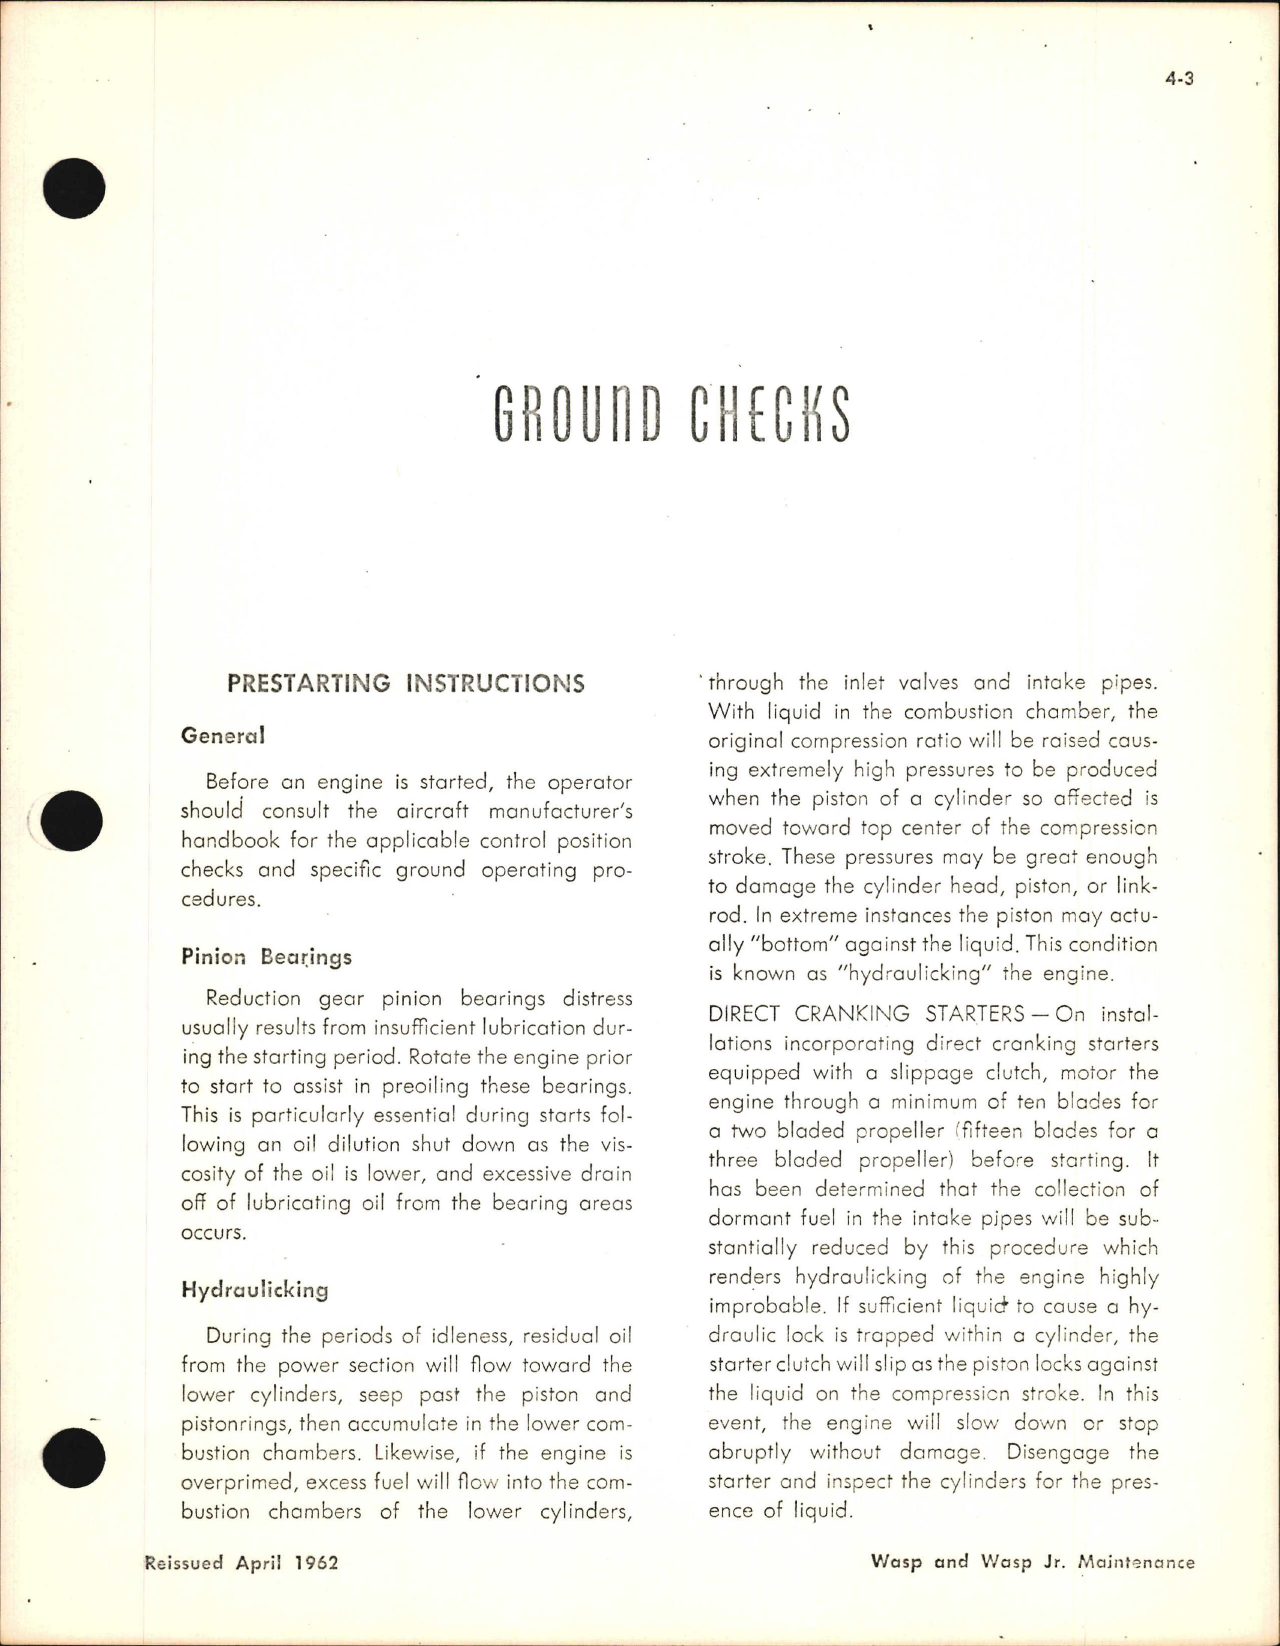 Sample page 6 from AirCorps Library document: Maintenance & Service for R-985 and R-1340 Engines